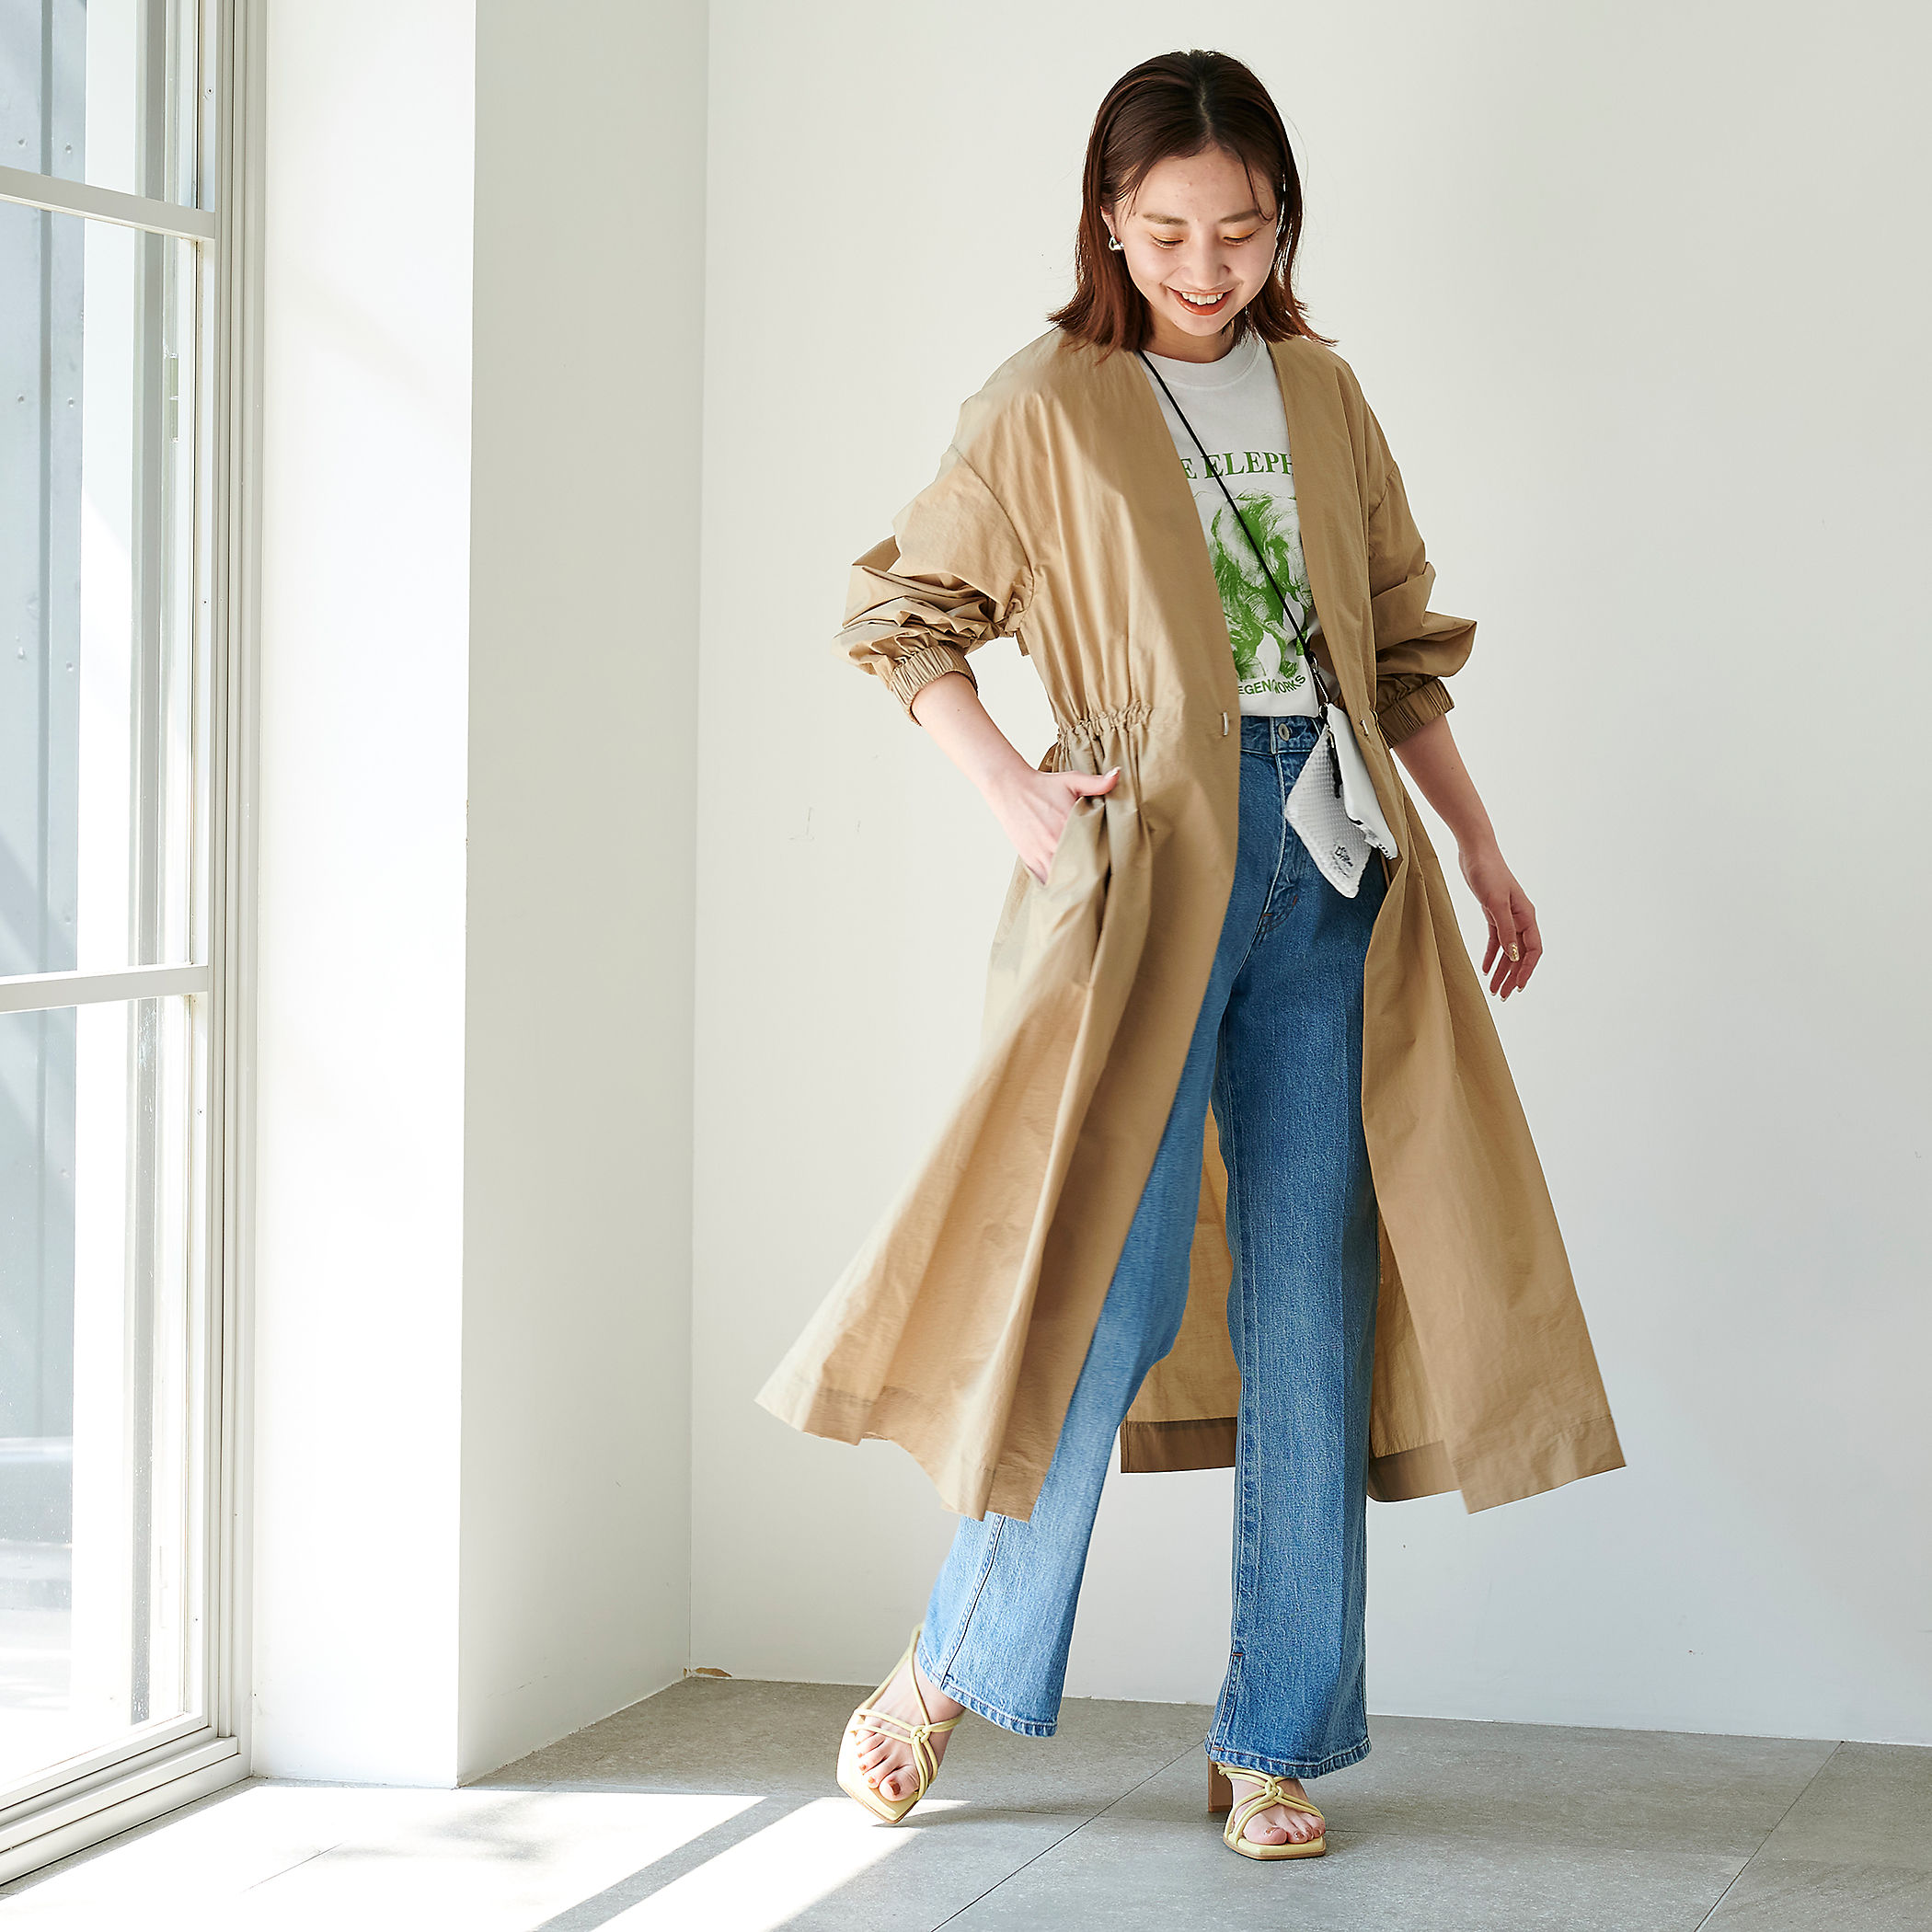 UNITED ARROWS green label relaxing【矢野未希子さん着用】 ギャザー ドロスト ガウン コート￥16,500